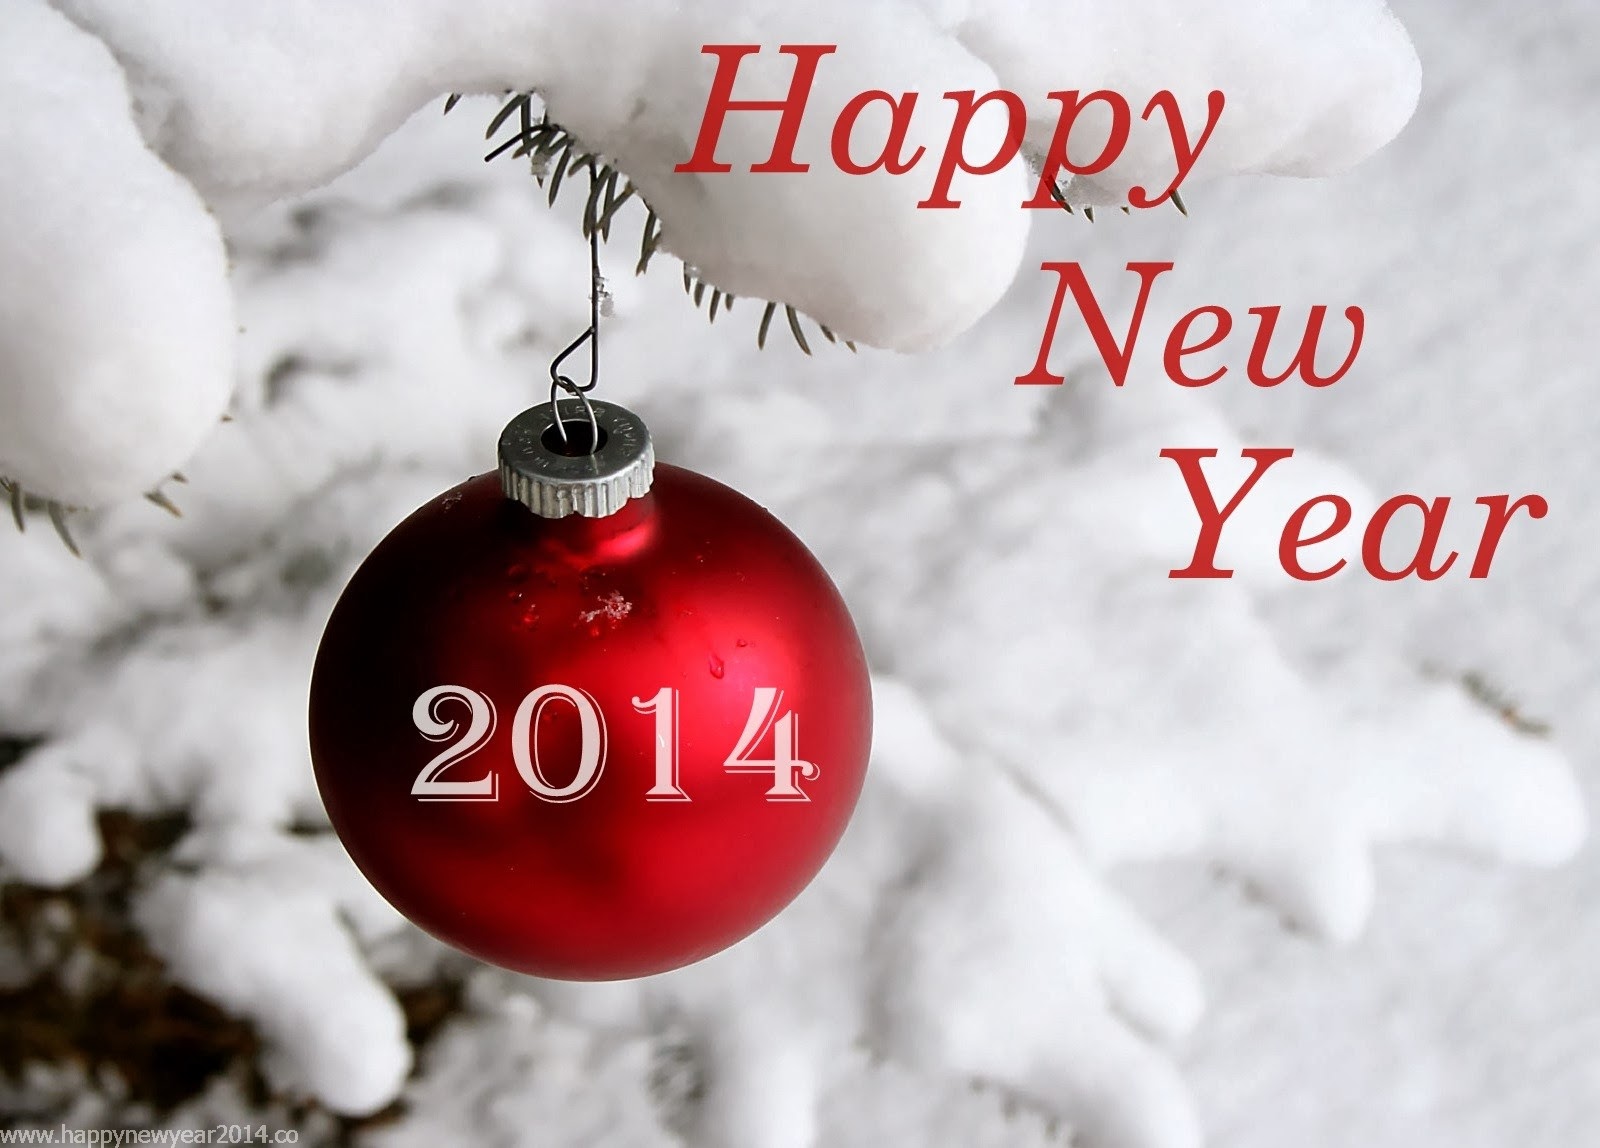 ... New Year Wallpapers 2014 | HD Photos Collection | Happy New Year 2014